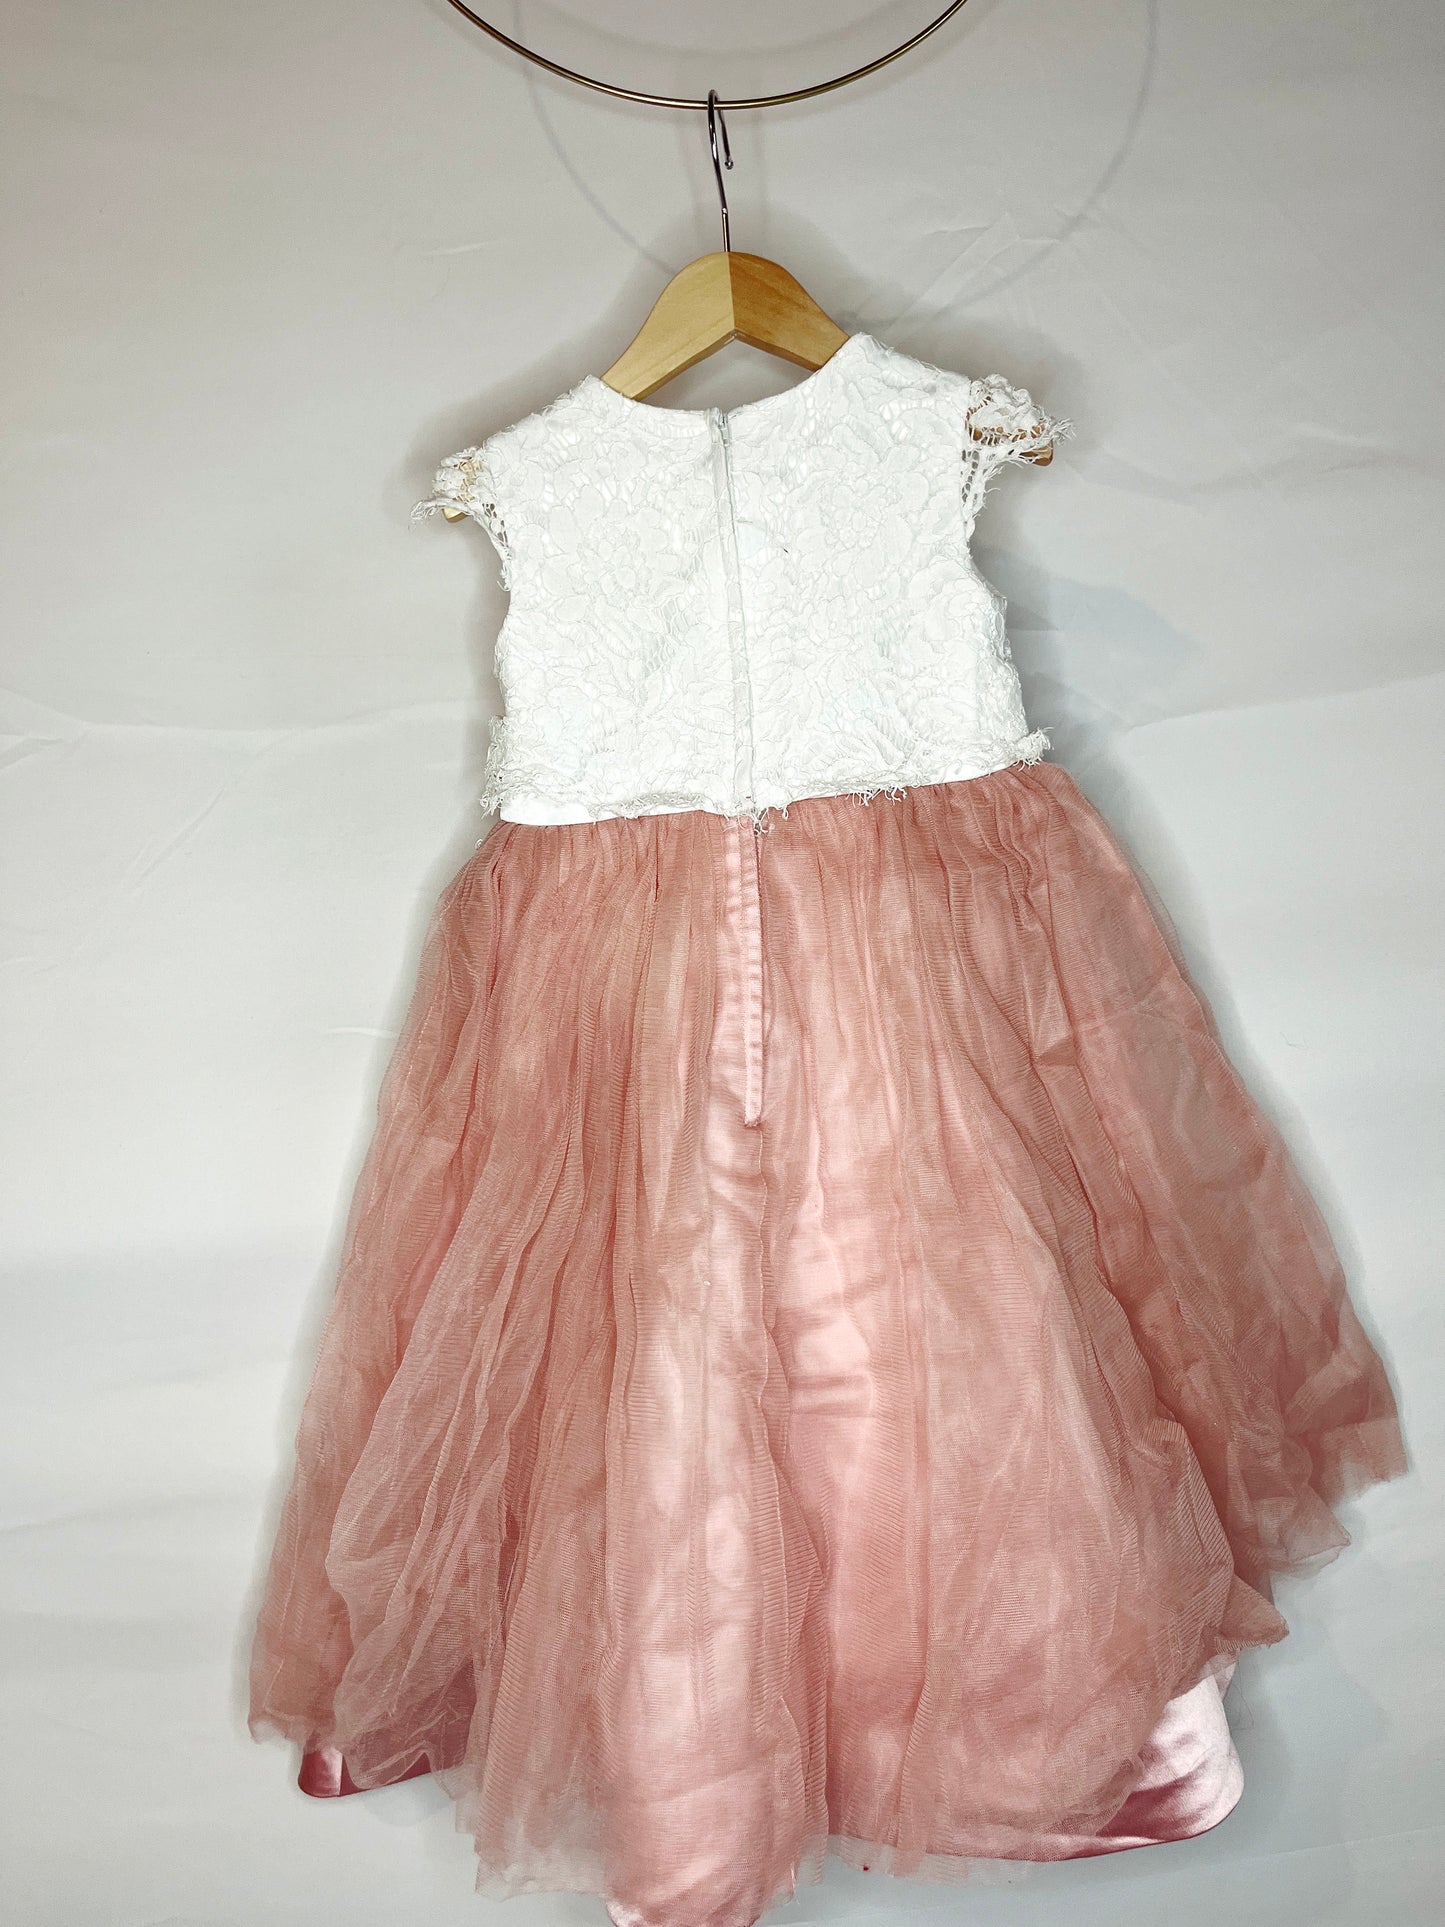 Pink Tulle Skirt with Lace Top Dress